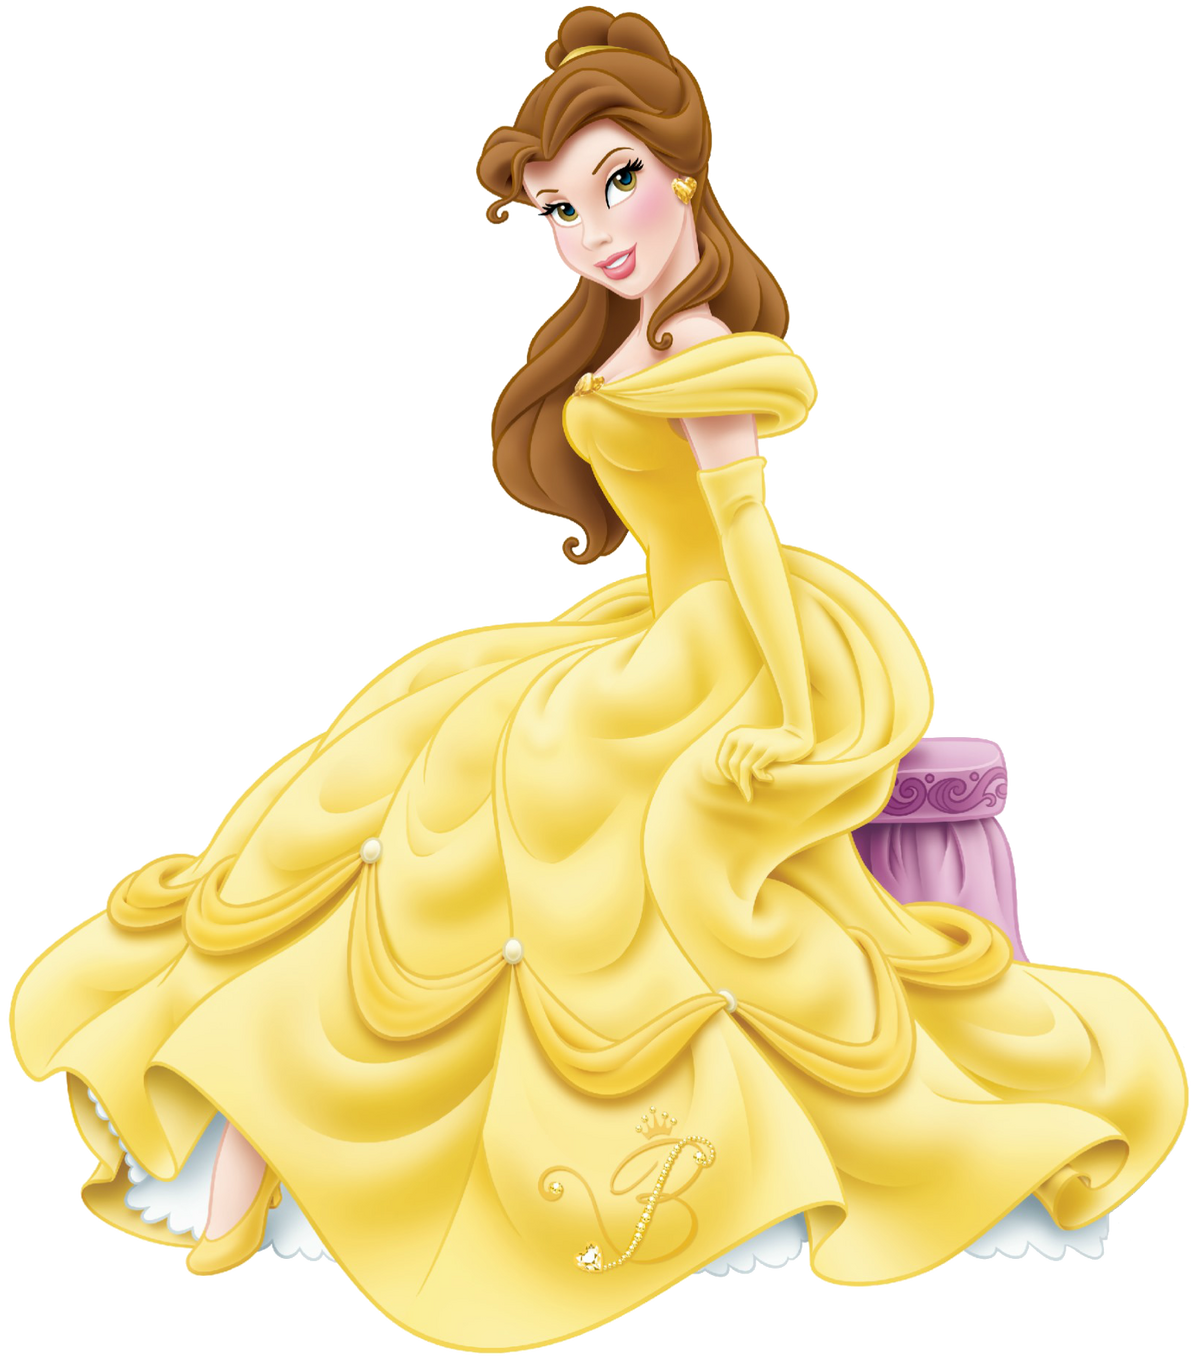 Beautiful Belle.., especially from behind